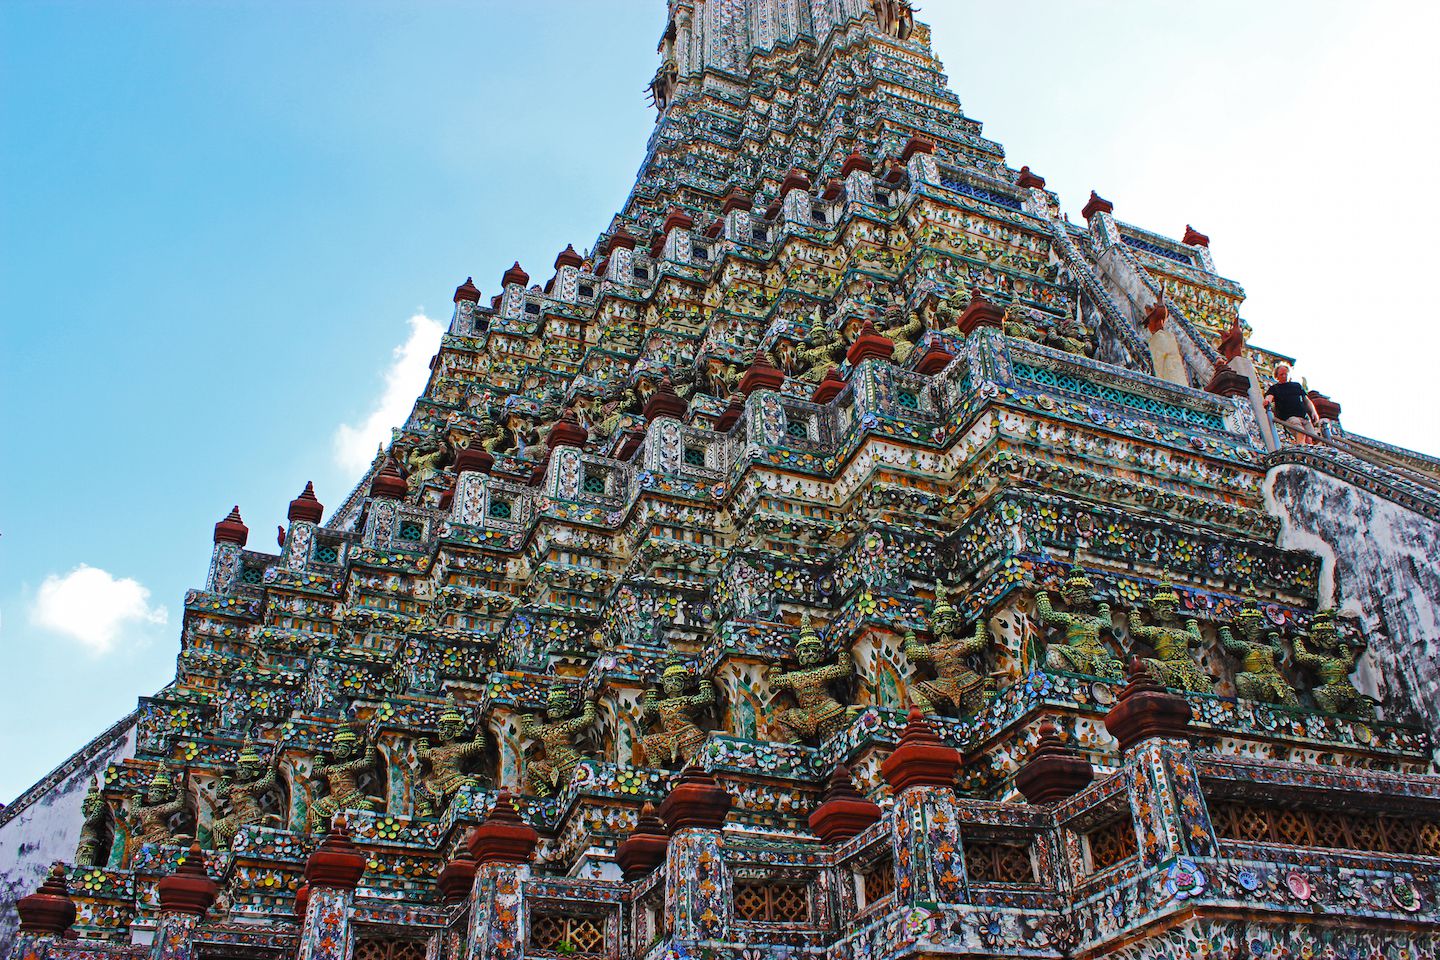 Details on the chedi of Wat Arun